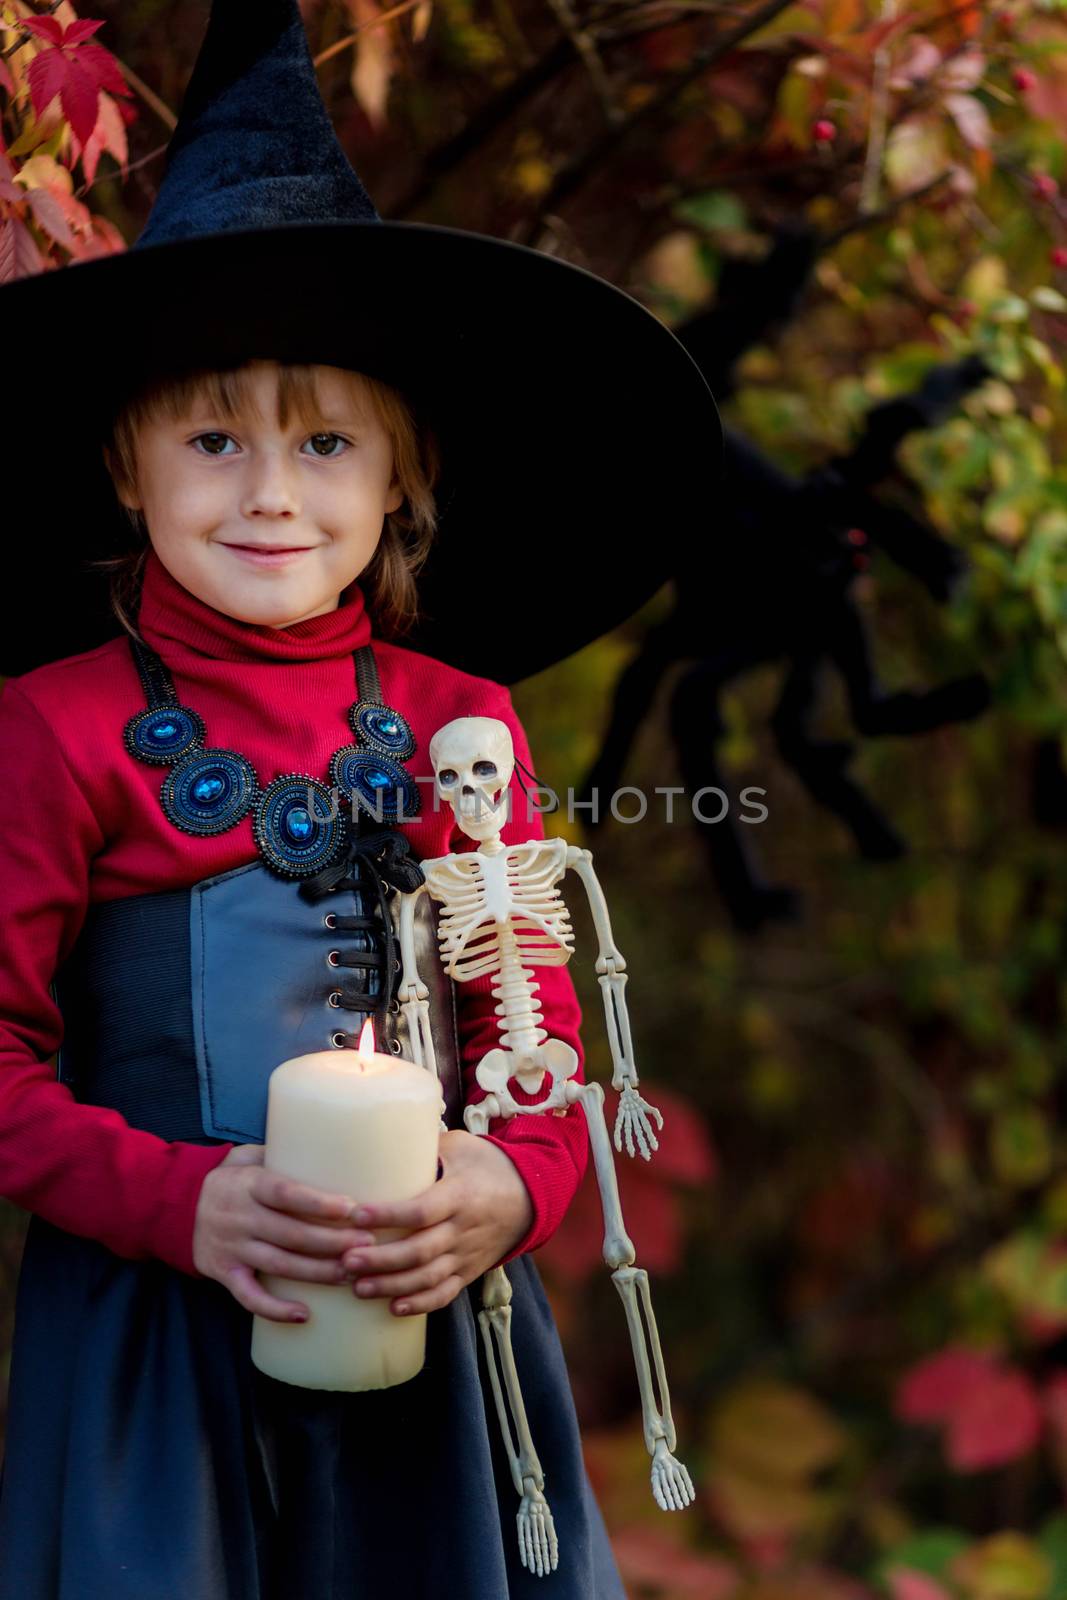 Little girl dressed as a witch holding a candle on a halloween party